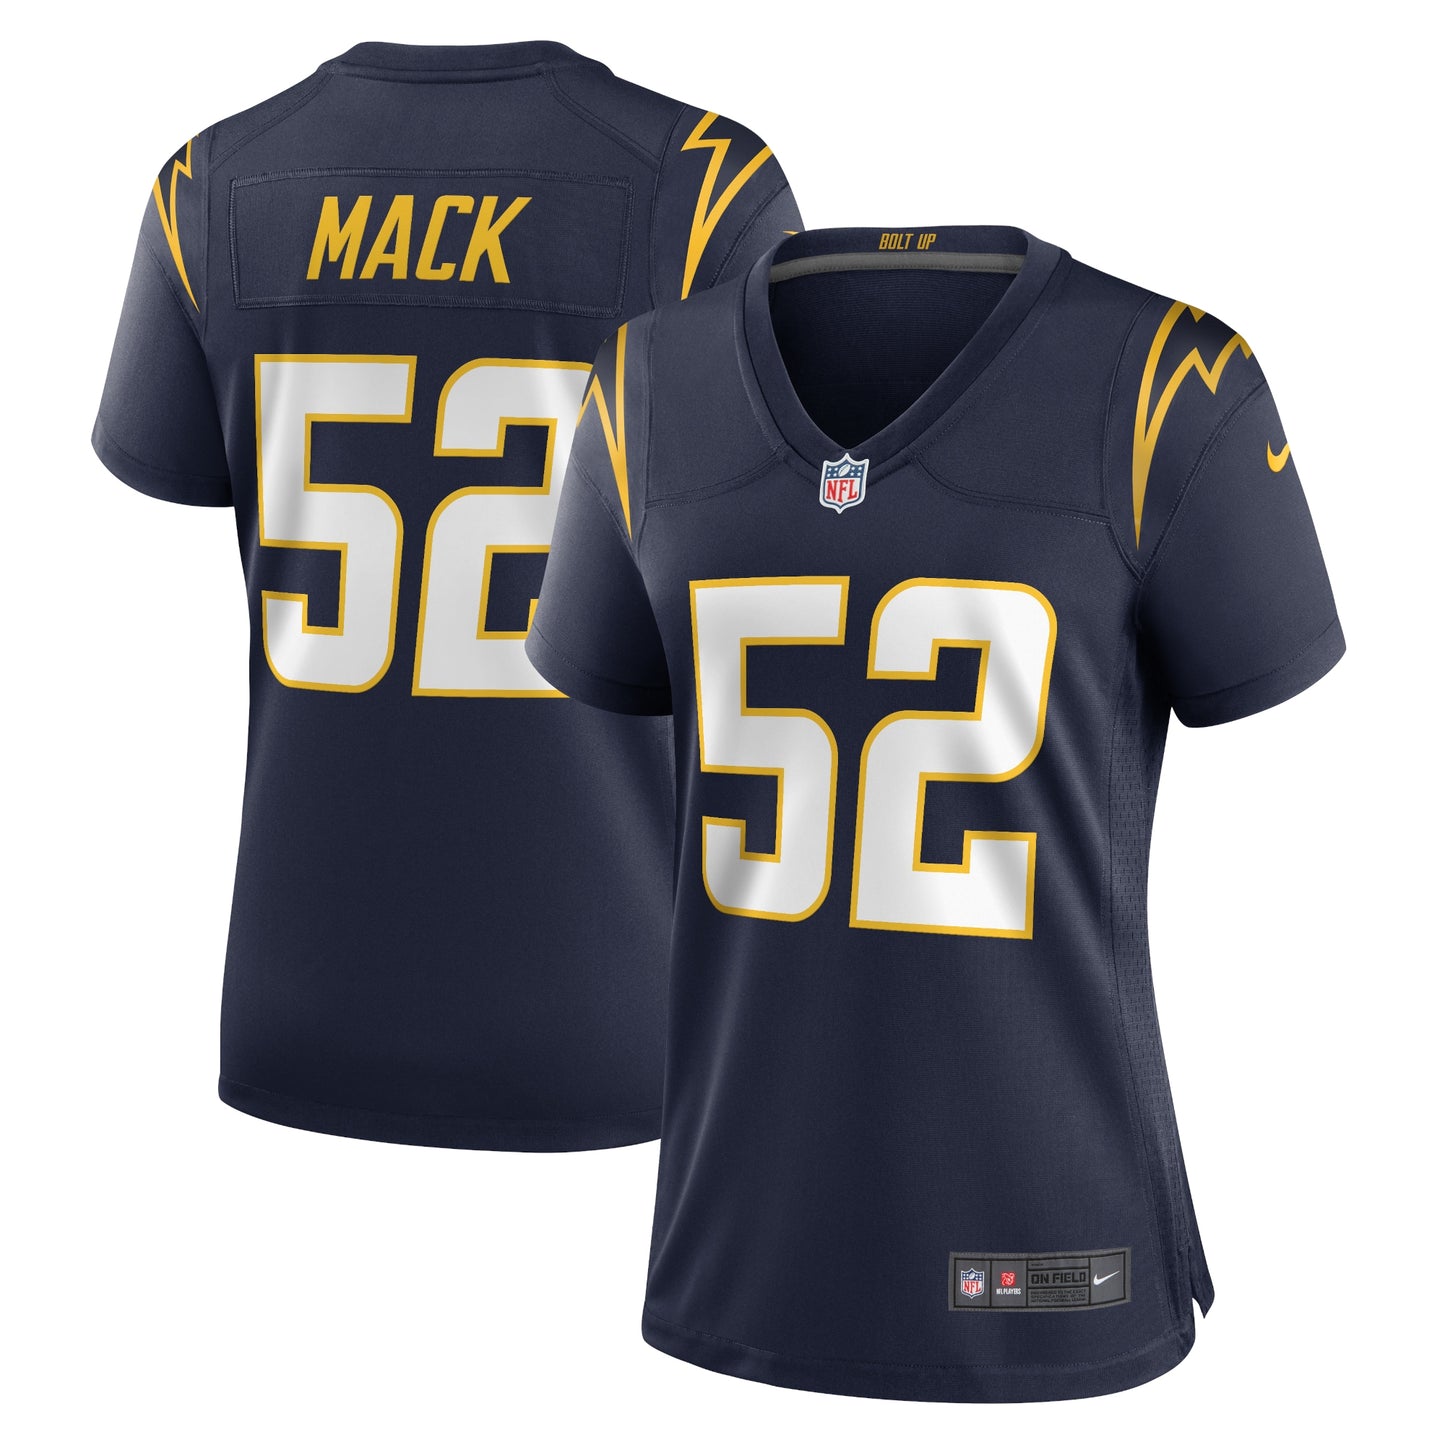 Khalil Mack Los Angeles Chargers Nike Women's Alternate Game Jersey - Navy